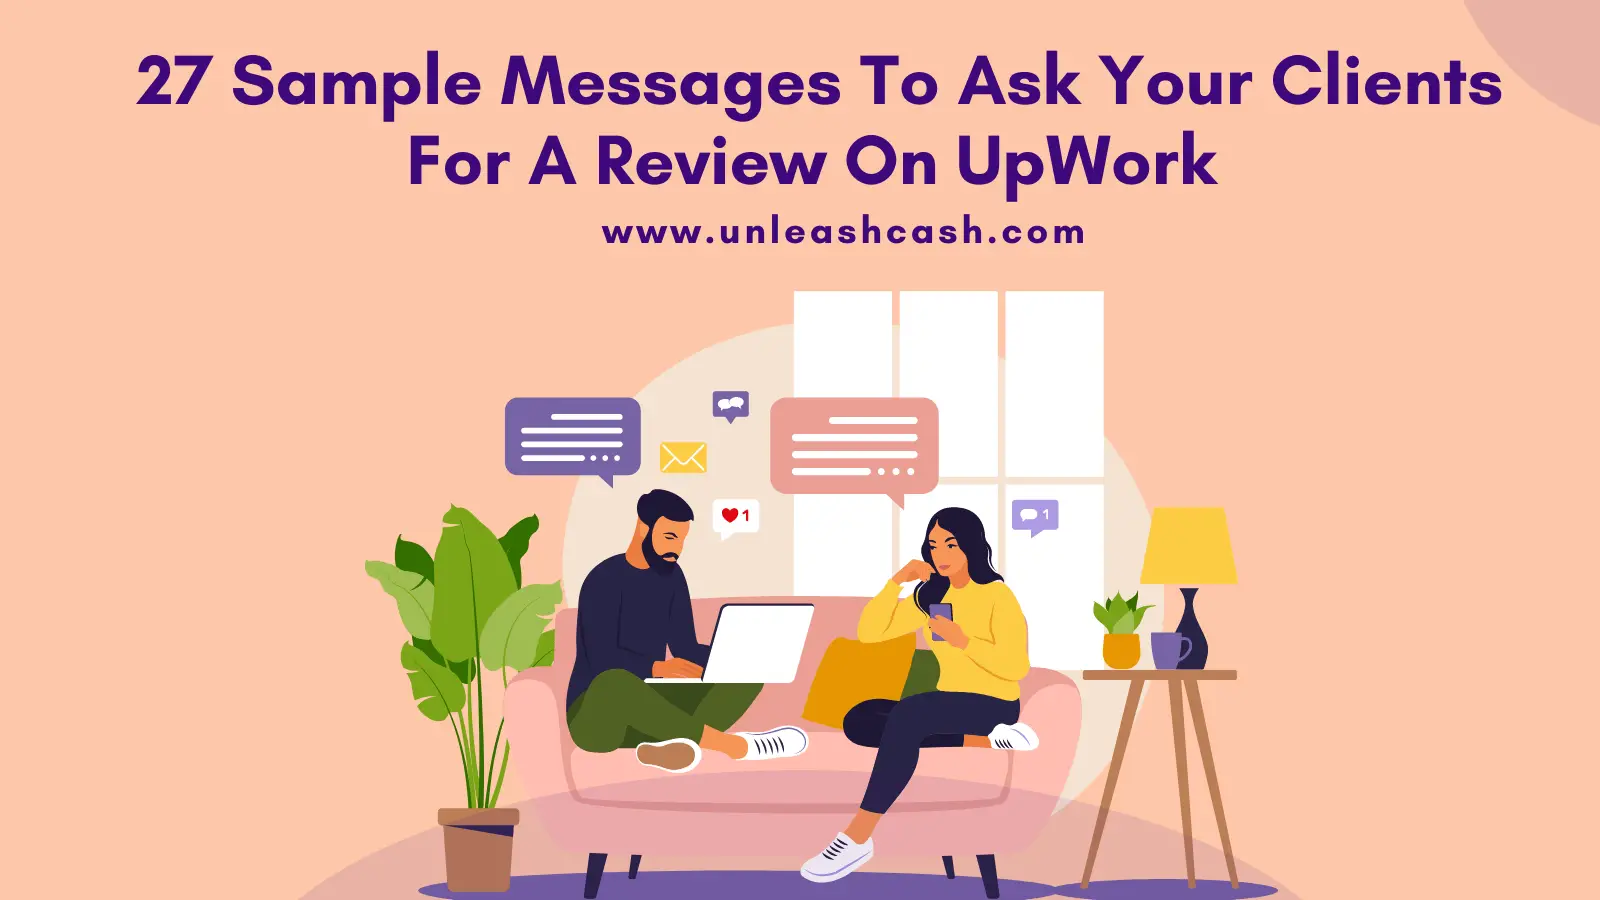 27 Sample Messages To Ask Your Clients For A Review On UpWork